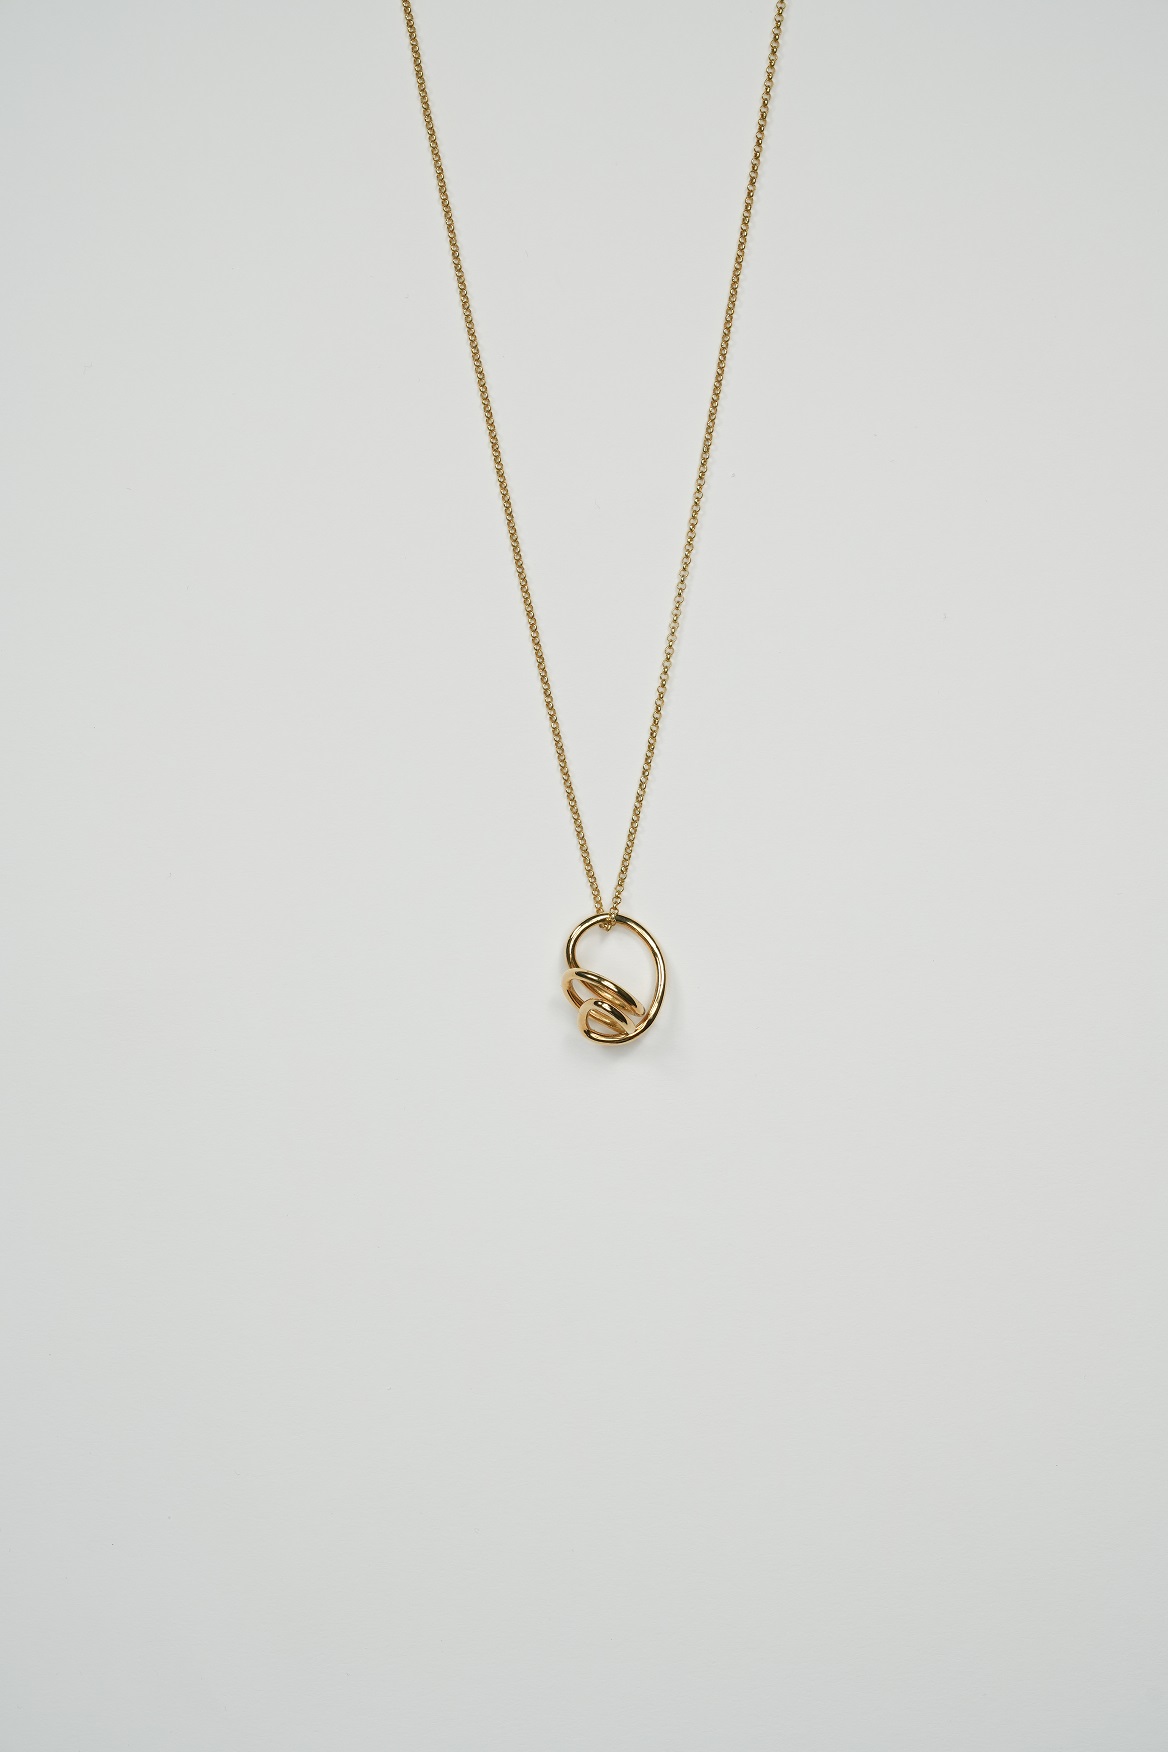 24k yellow gold vermeil pendant in 925 silver and chain